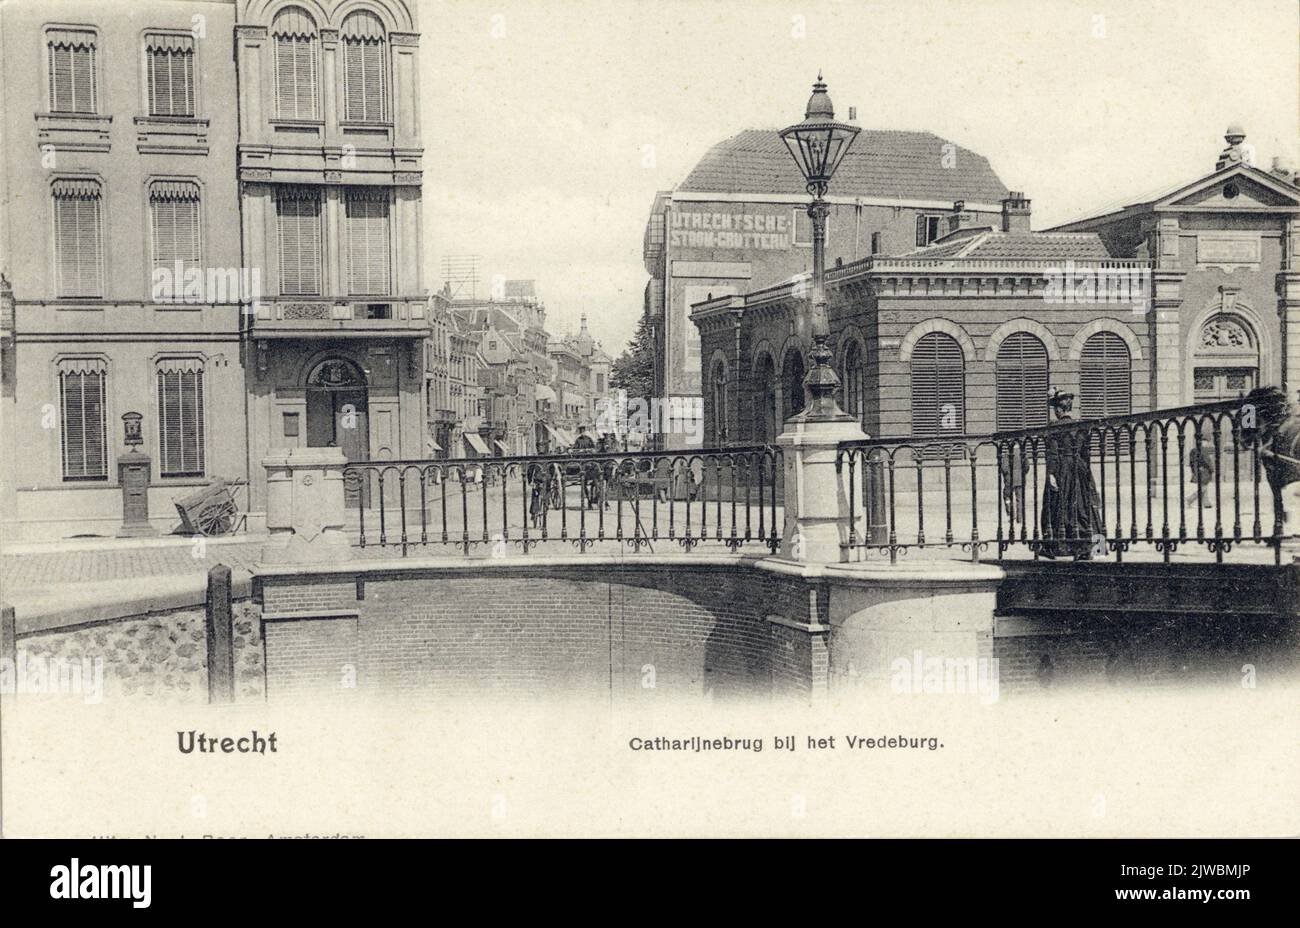 View on a part of the Catharijnebrug over the Stadsbuitengracht in Utrecht with the entrance to Vredenburg in the middle. Stock Photo